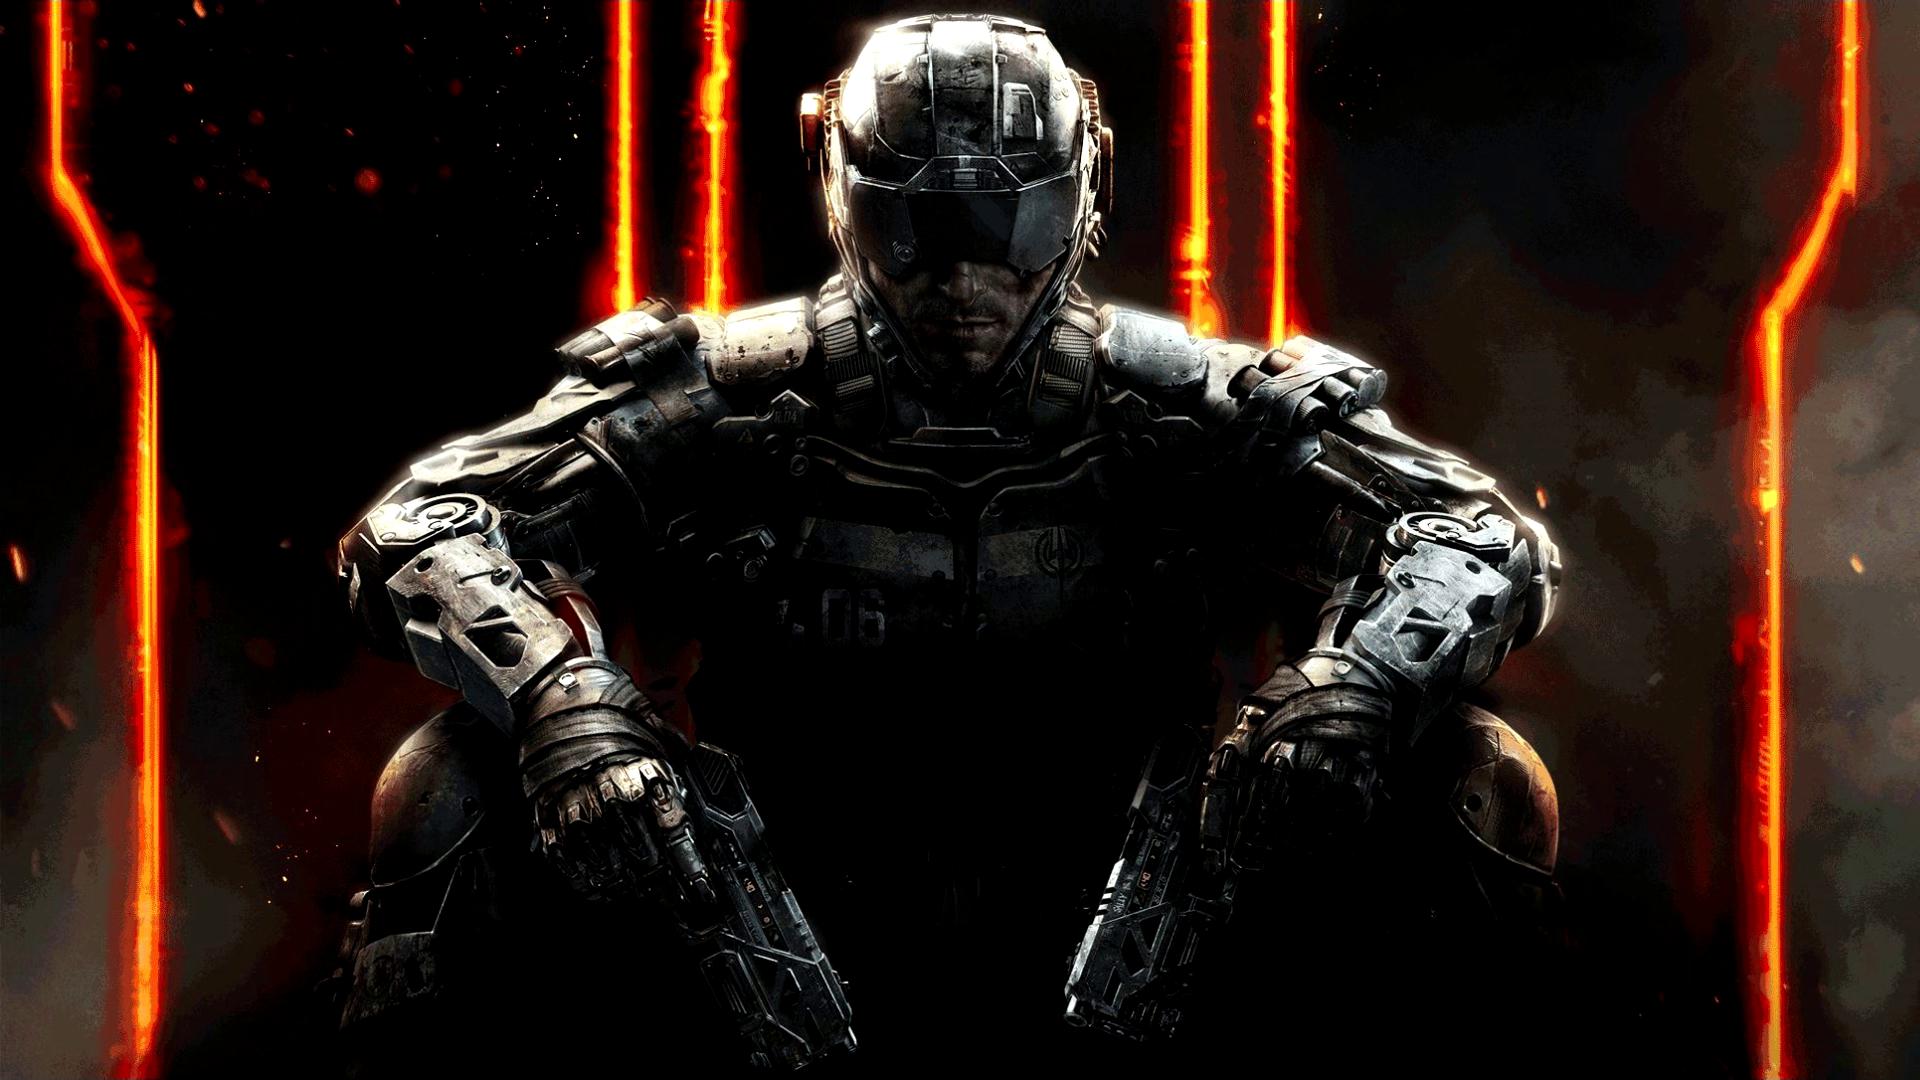 black ops 3 wallpaper,movie,fictional character,superhero,action figure,action adventure game